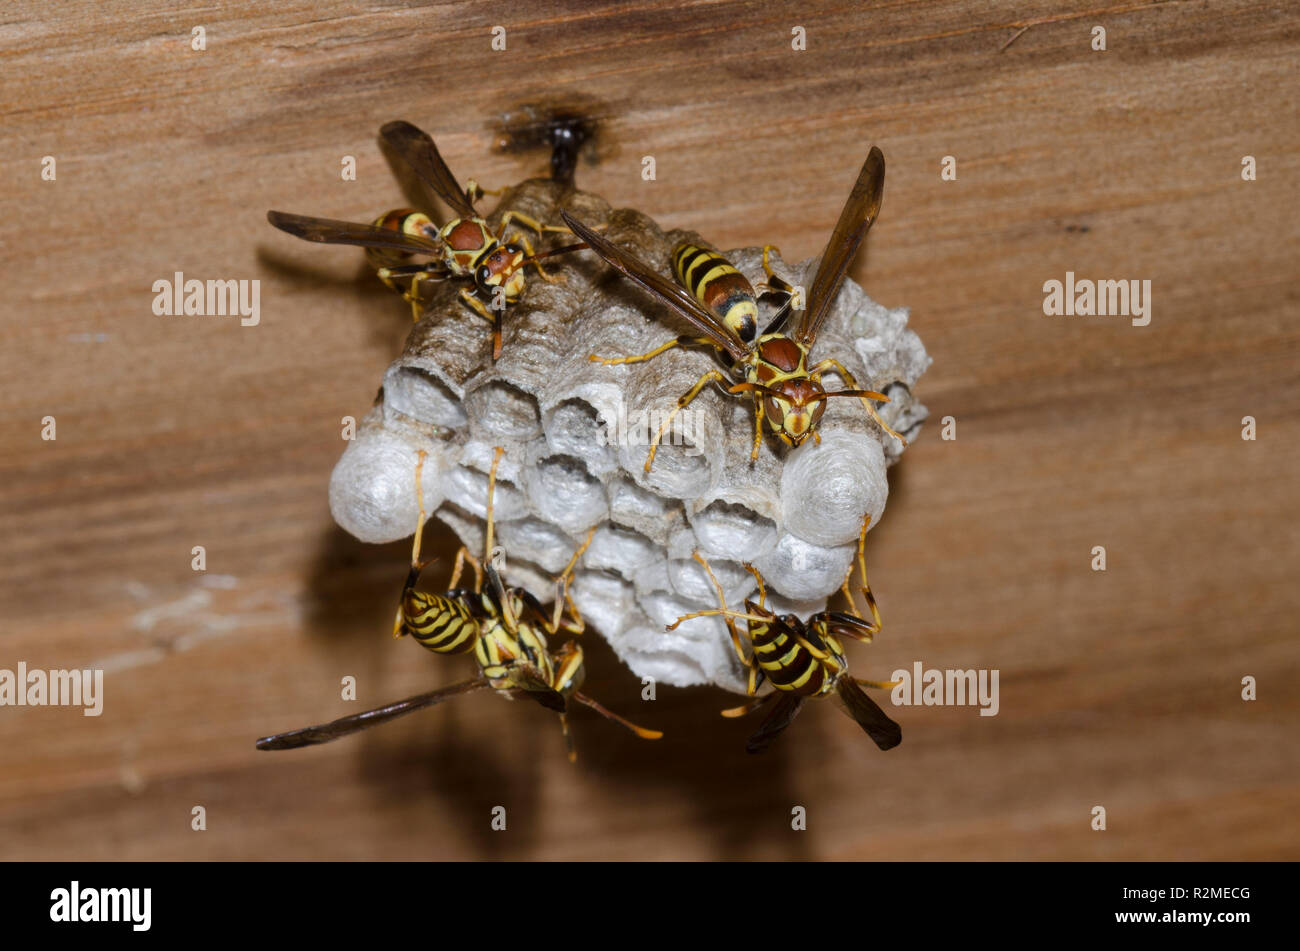 Paper Wasps, Polistes exclamans, on nest Stock Photo